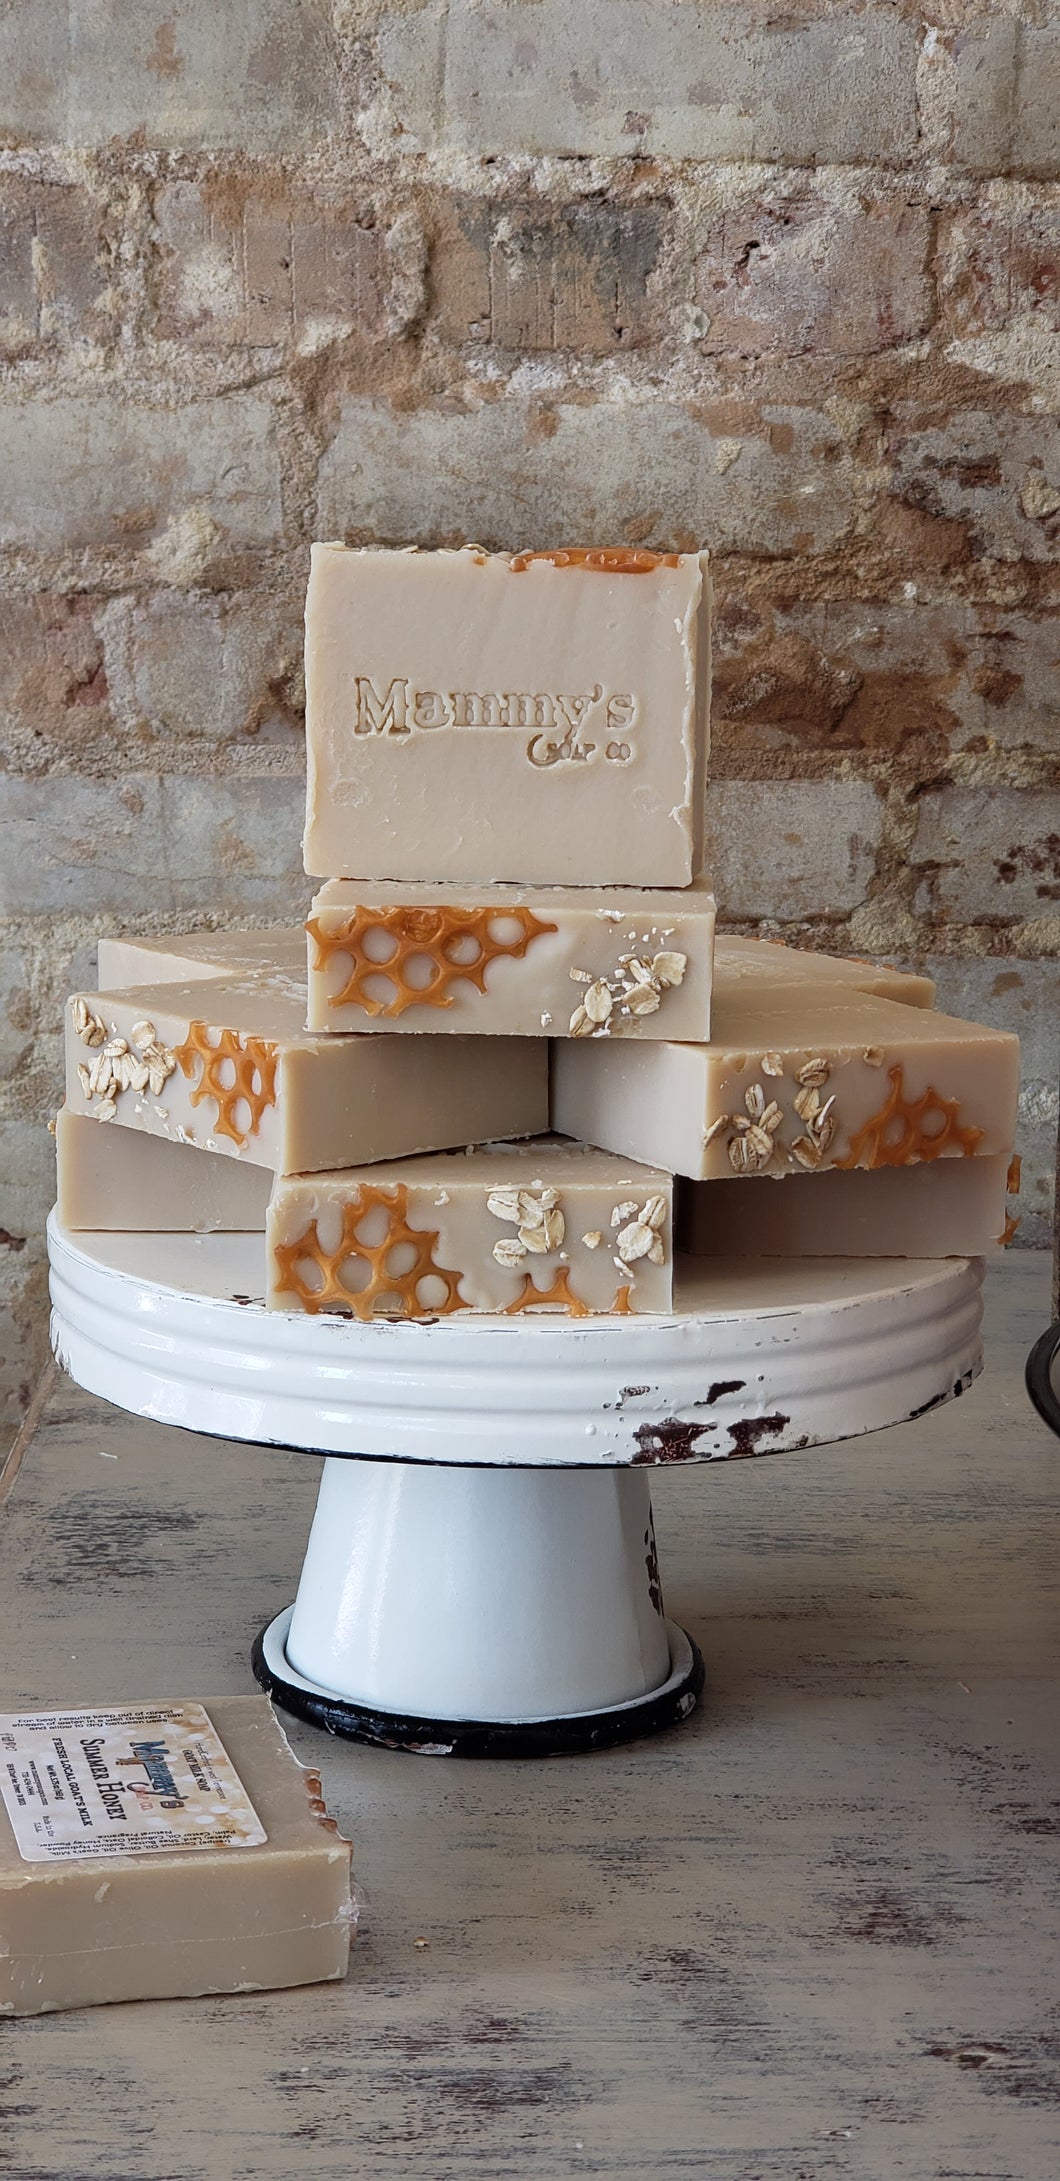 cream colored handmade bar soap with oats and honeycomb look stacked on vintage metal pedestal with old brick wall background